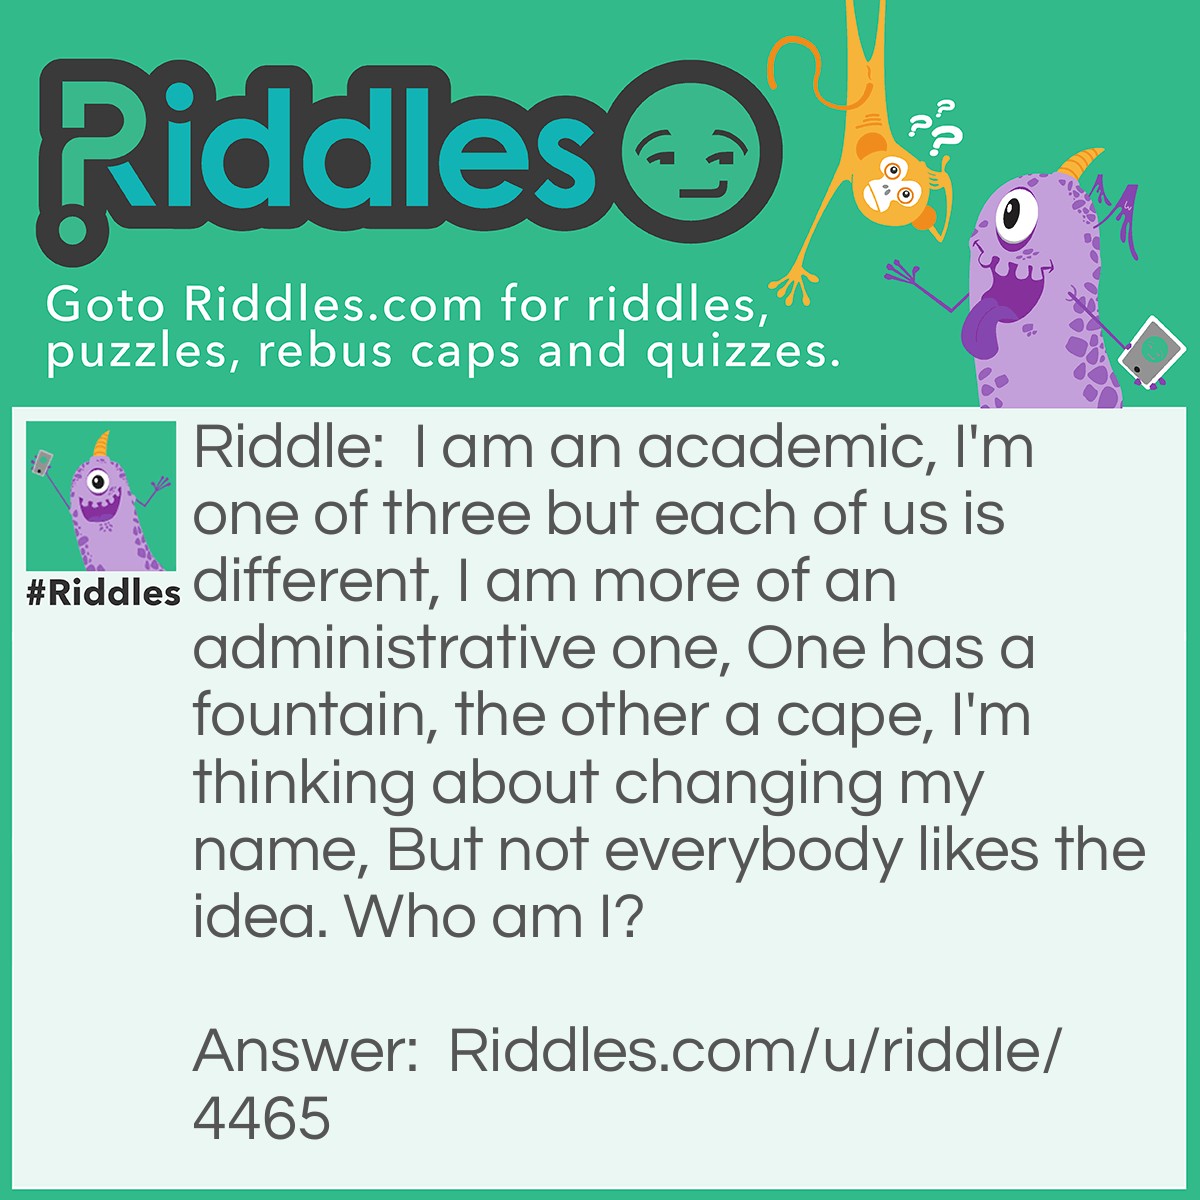 Riddle: I am an academic, I'm one of three but each of us is different, I am more of an administrative one, One has a fountain, the other a cape, I'm thinking about changing my name, But not everybody likes the idea. Who am I? Answer: Pretoria.